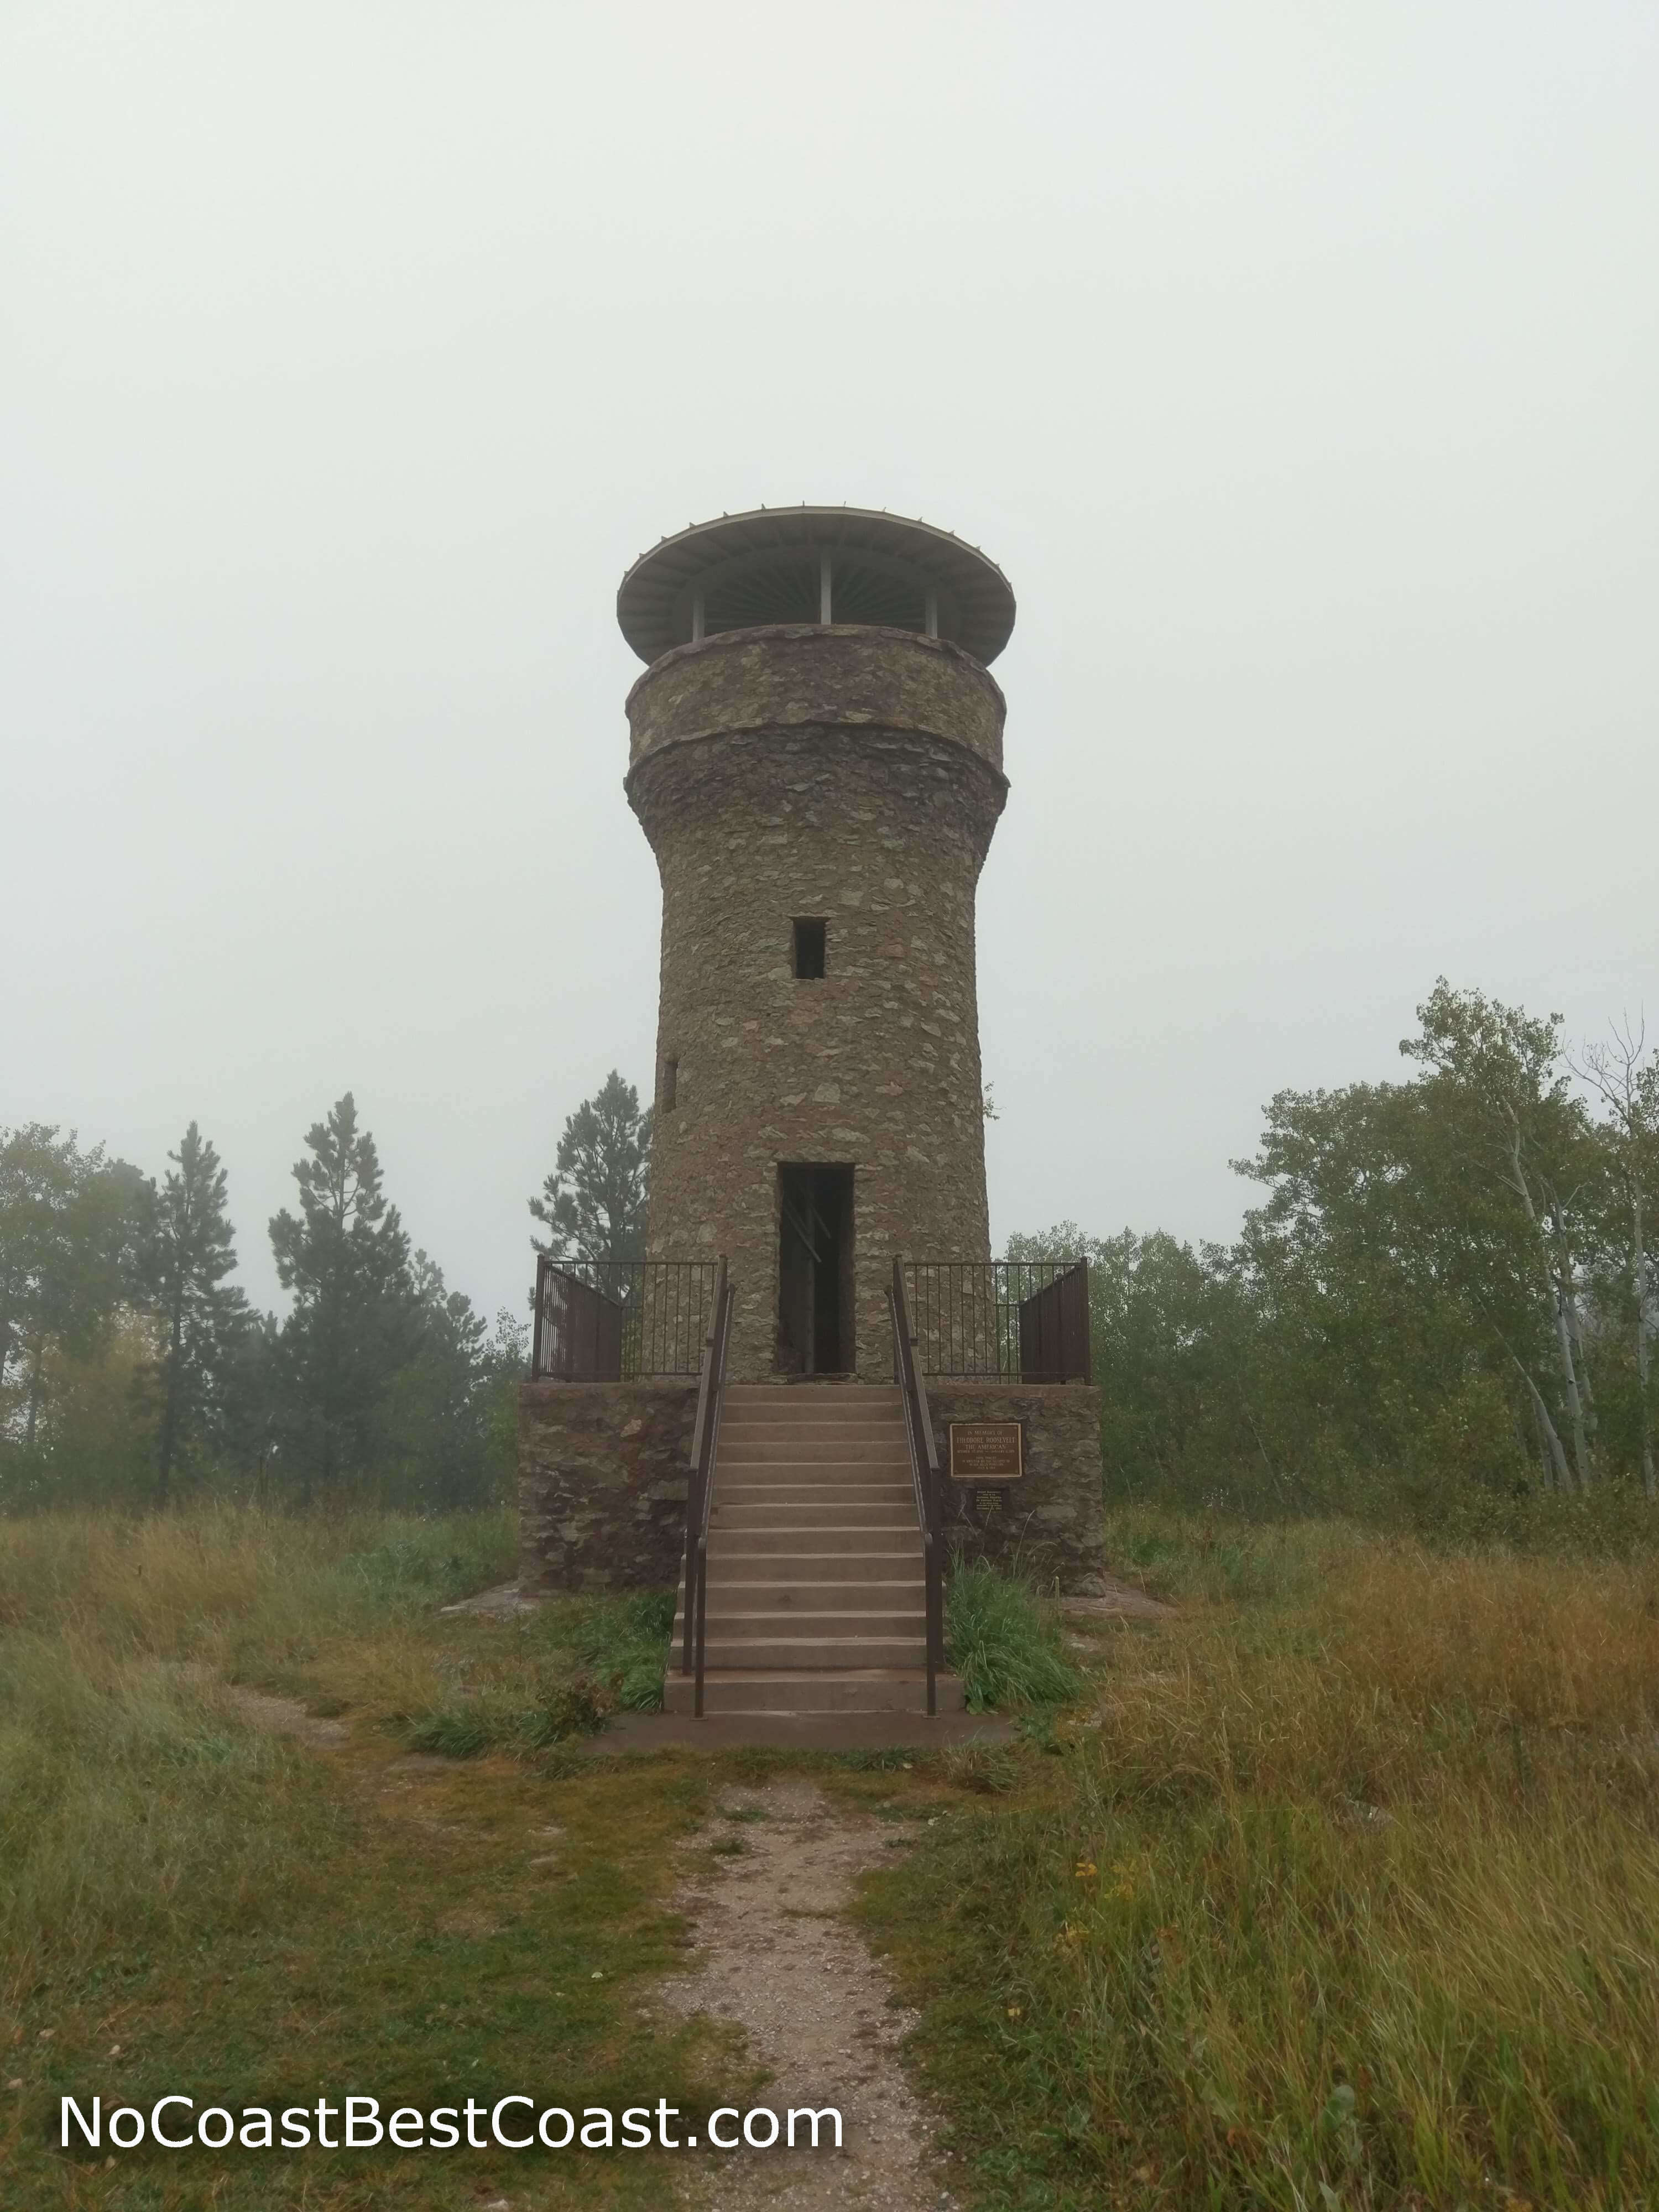 Seth Bullock built this tower by hand to honor his friend Teddy Roosevelt